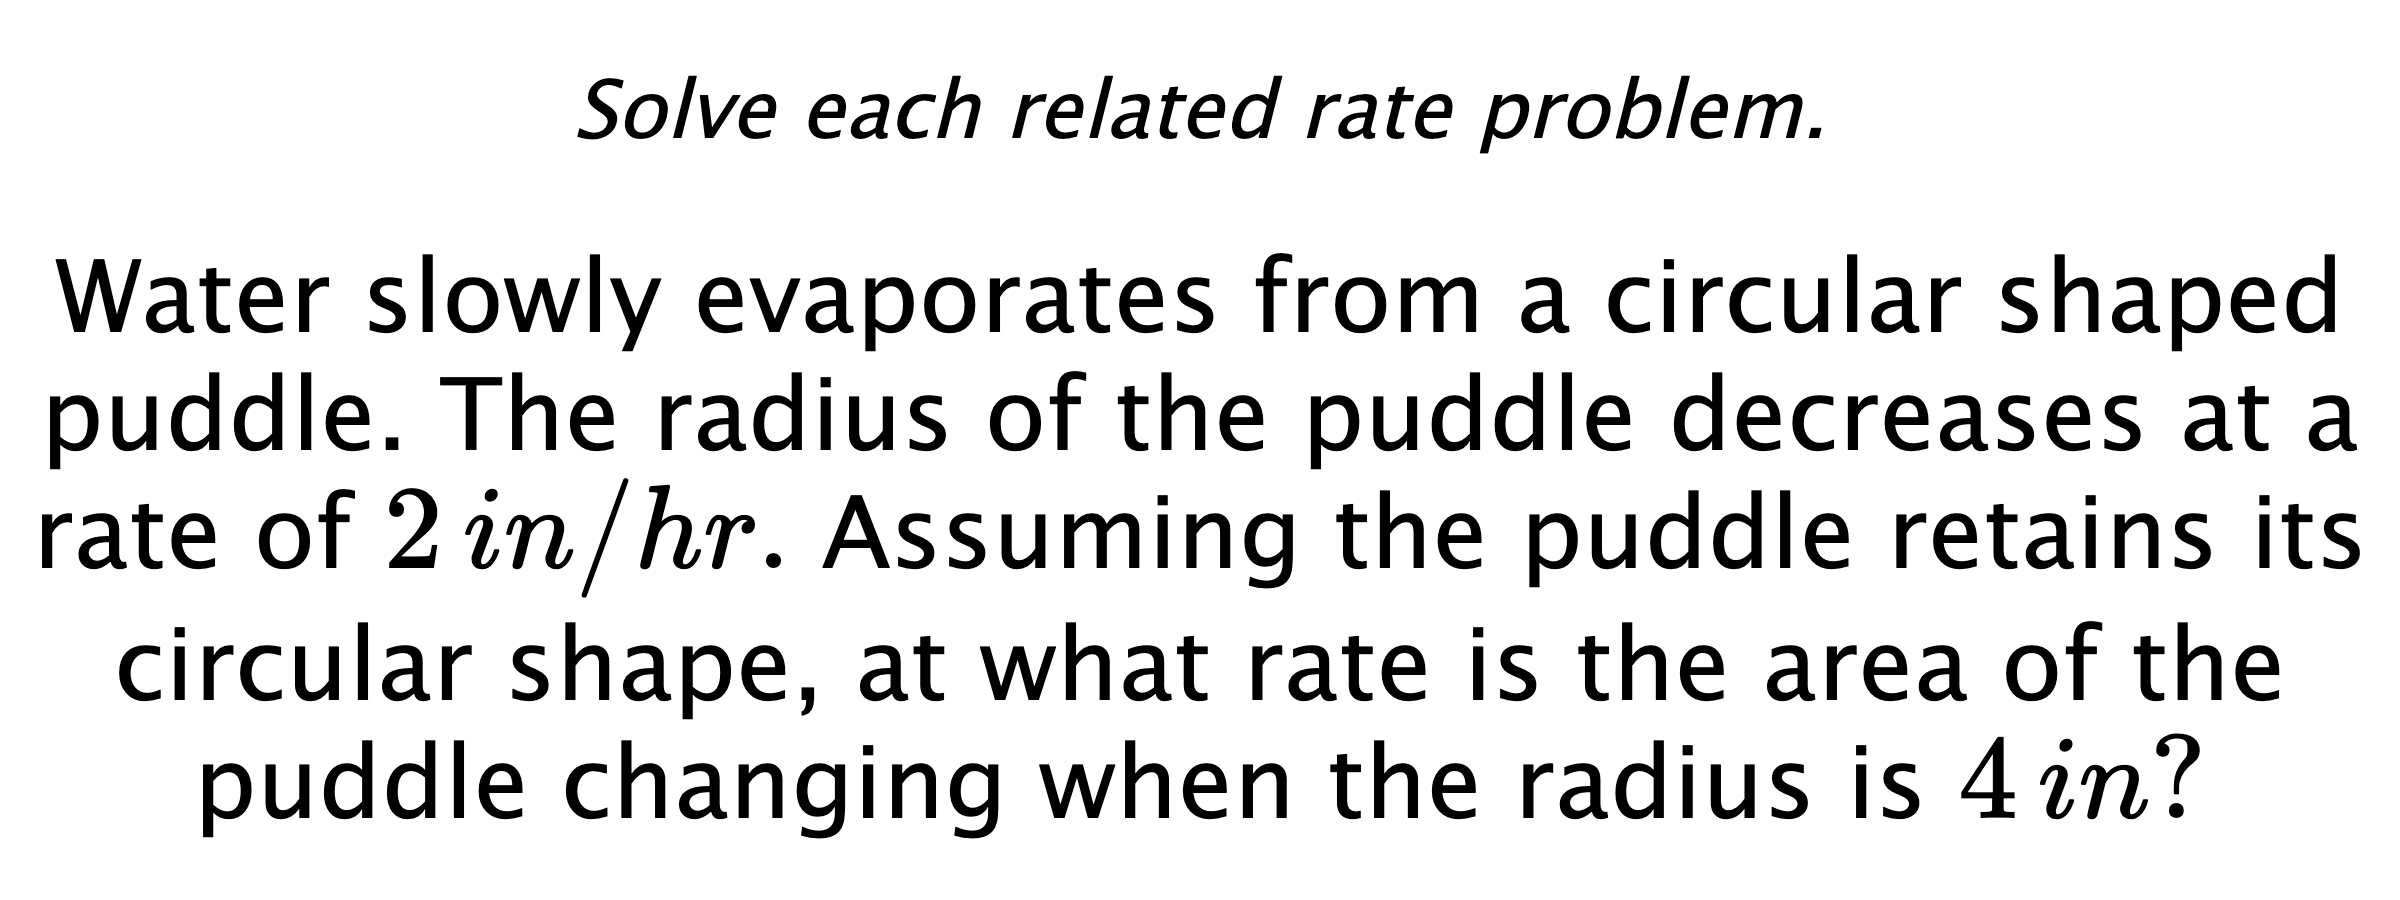 Solve each related rate problem. Water slowly evaporates from a circular shaped puddle. The radius of the puddle decreases at a rate of $2\,in/hr.$ Assuming the puddle retains its circular shape, at what rate is the area of the puddle changing when the radius is $4\,in?$